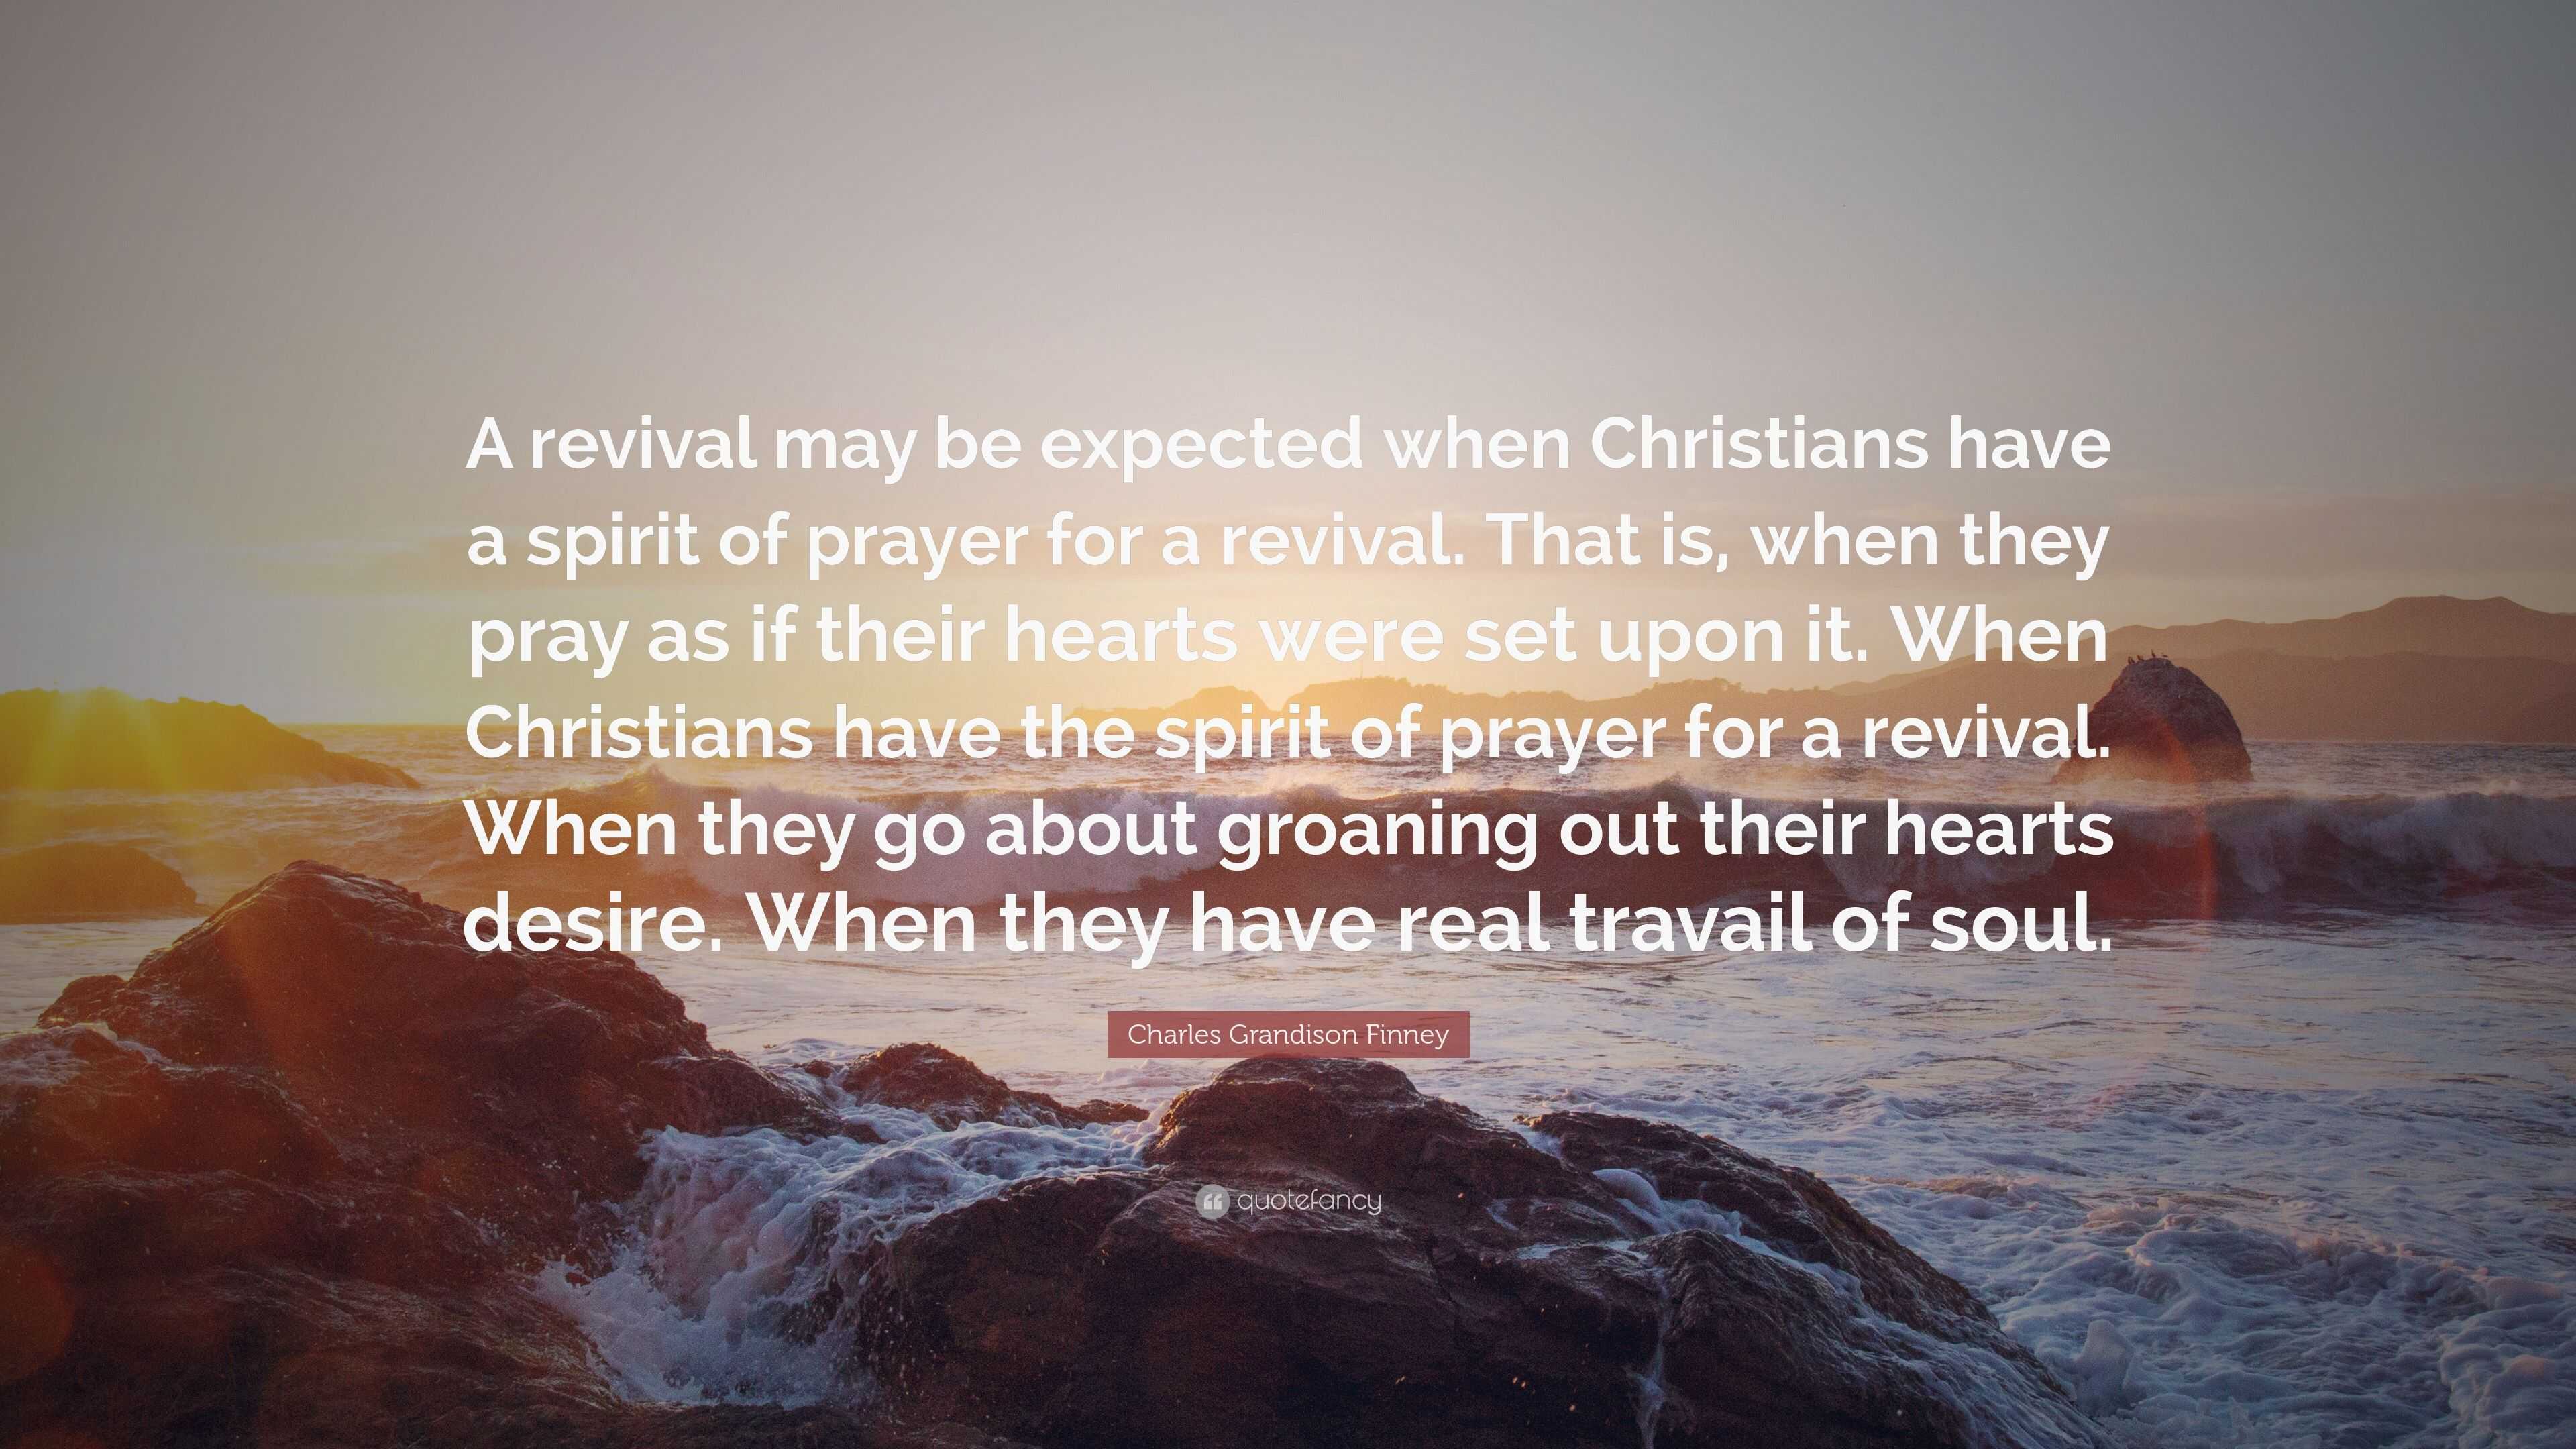 Charles Grandison Finney Quote “A revival may be expected when